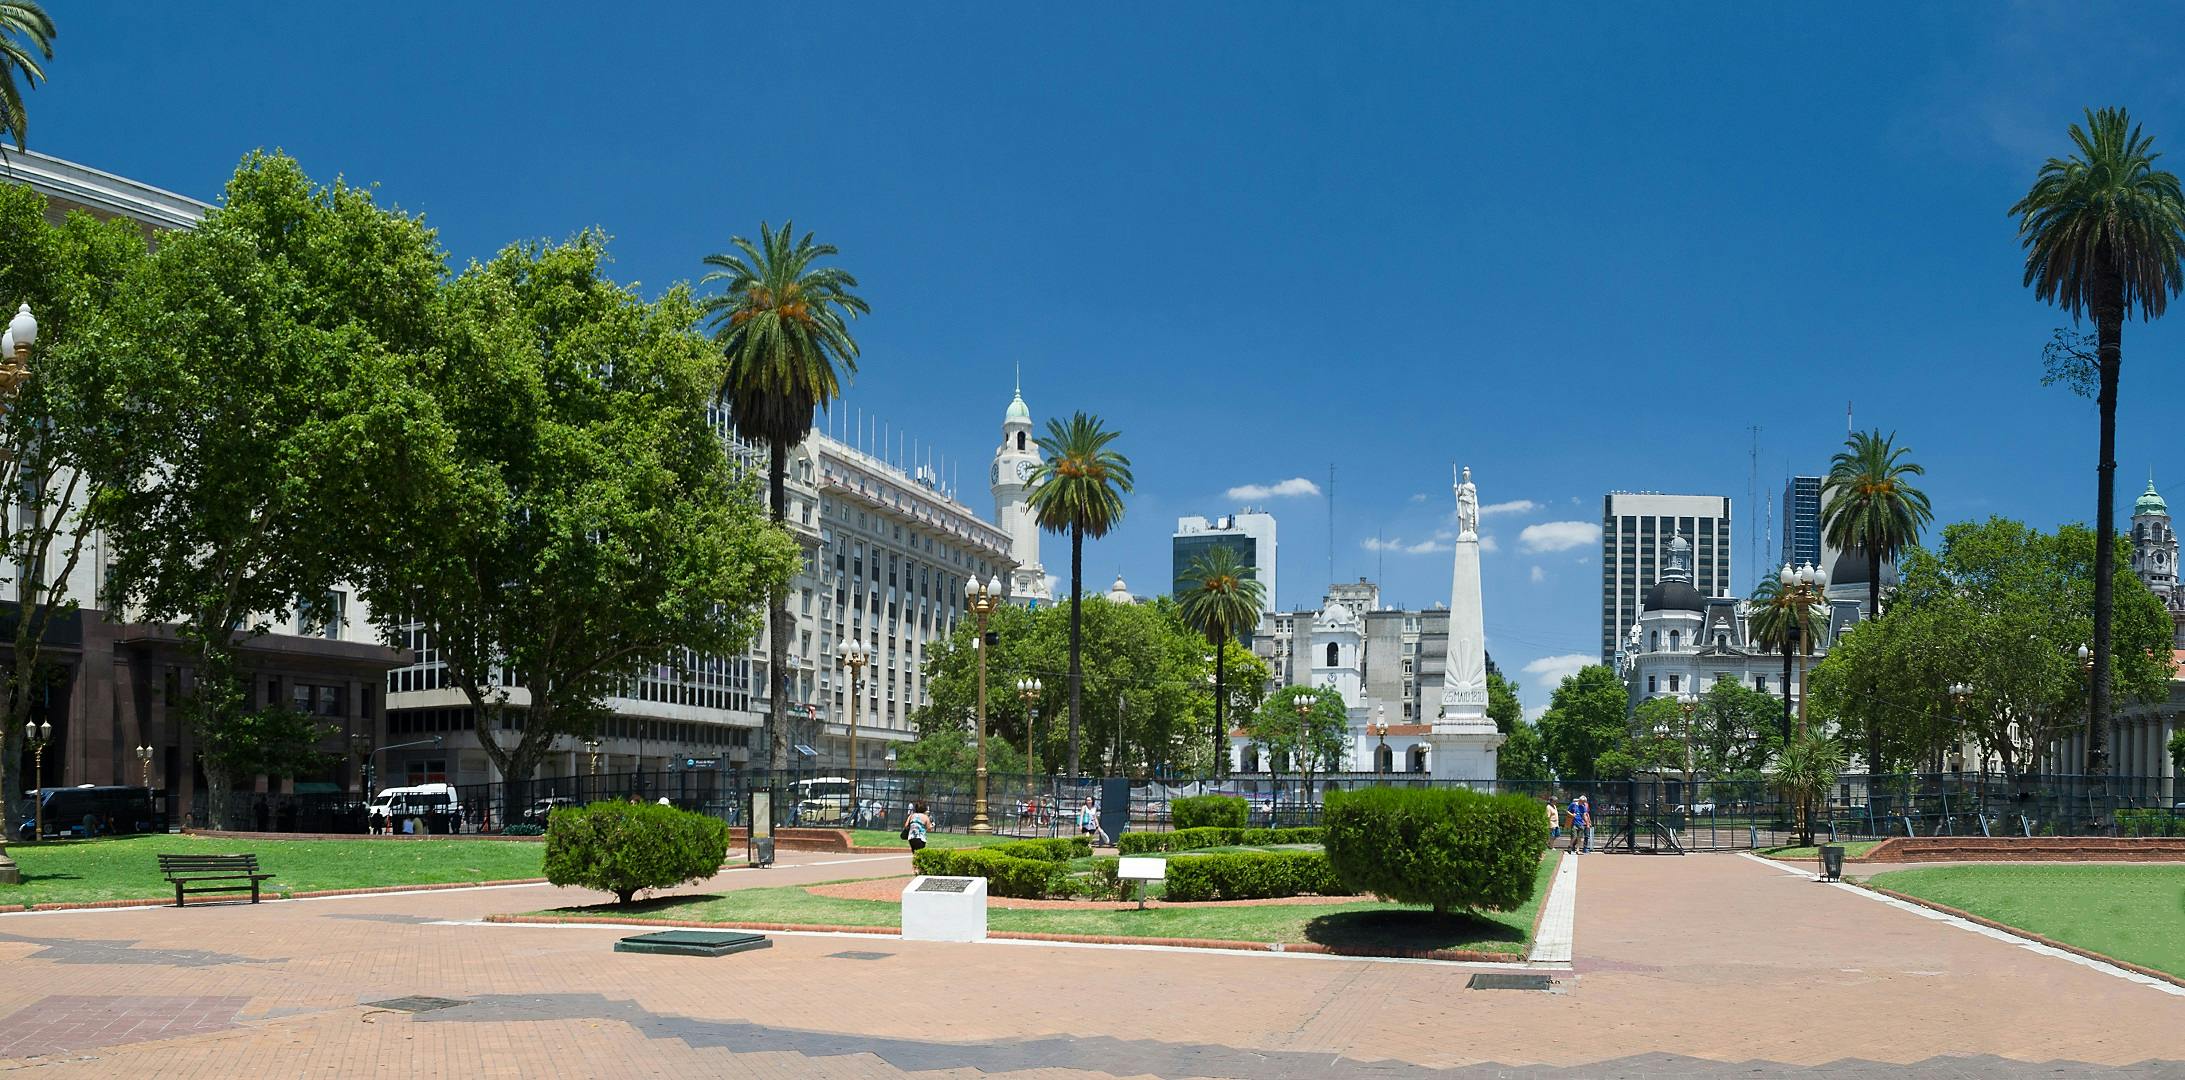 Shore Excursion small-group Buenos Aires guided tour